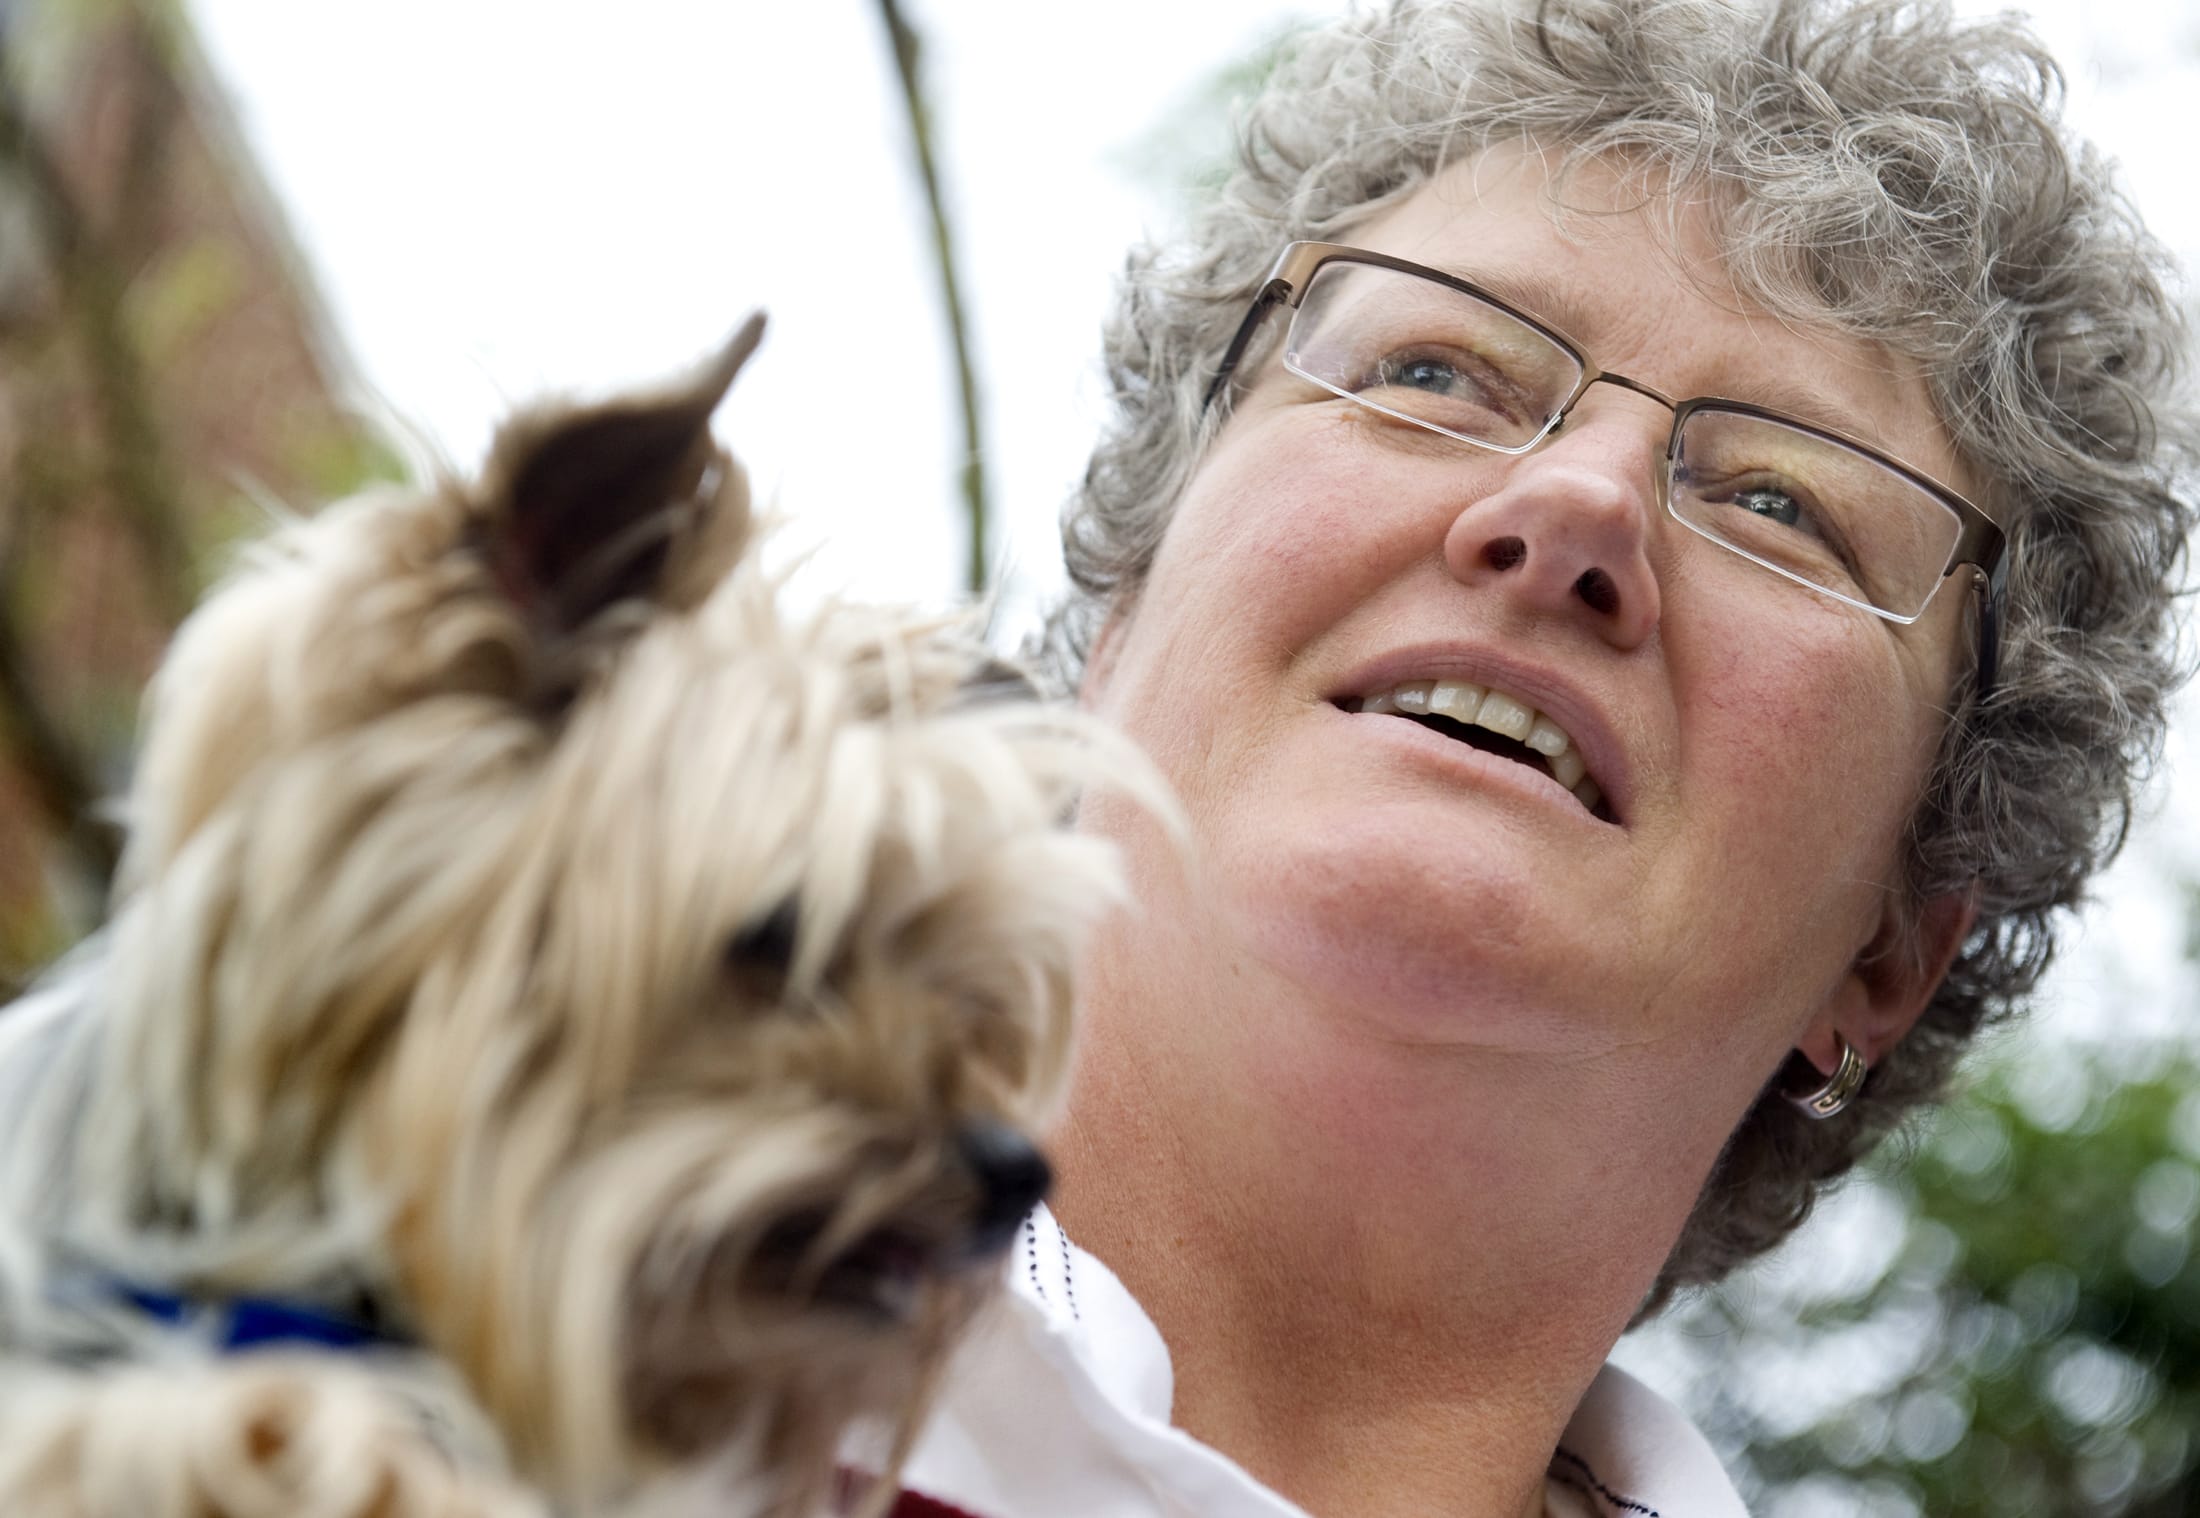 Pet acupuncturist Greta McVey holds a dog, Puff, in her home office in College Park, Md.